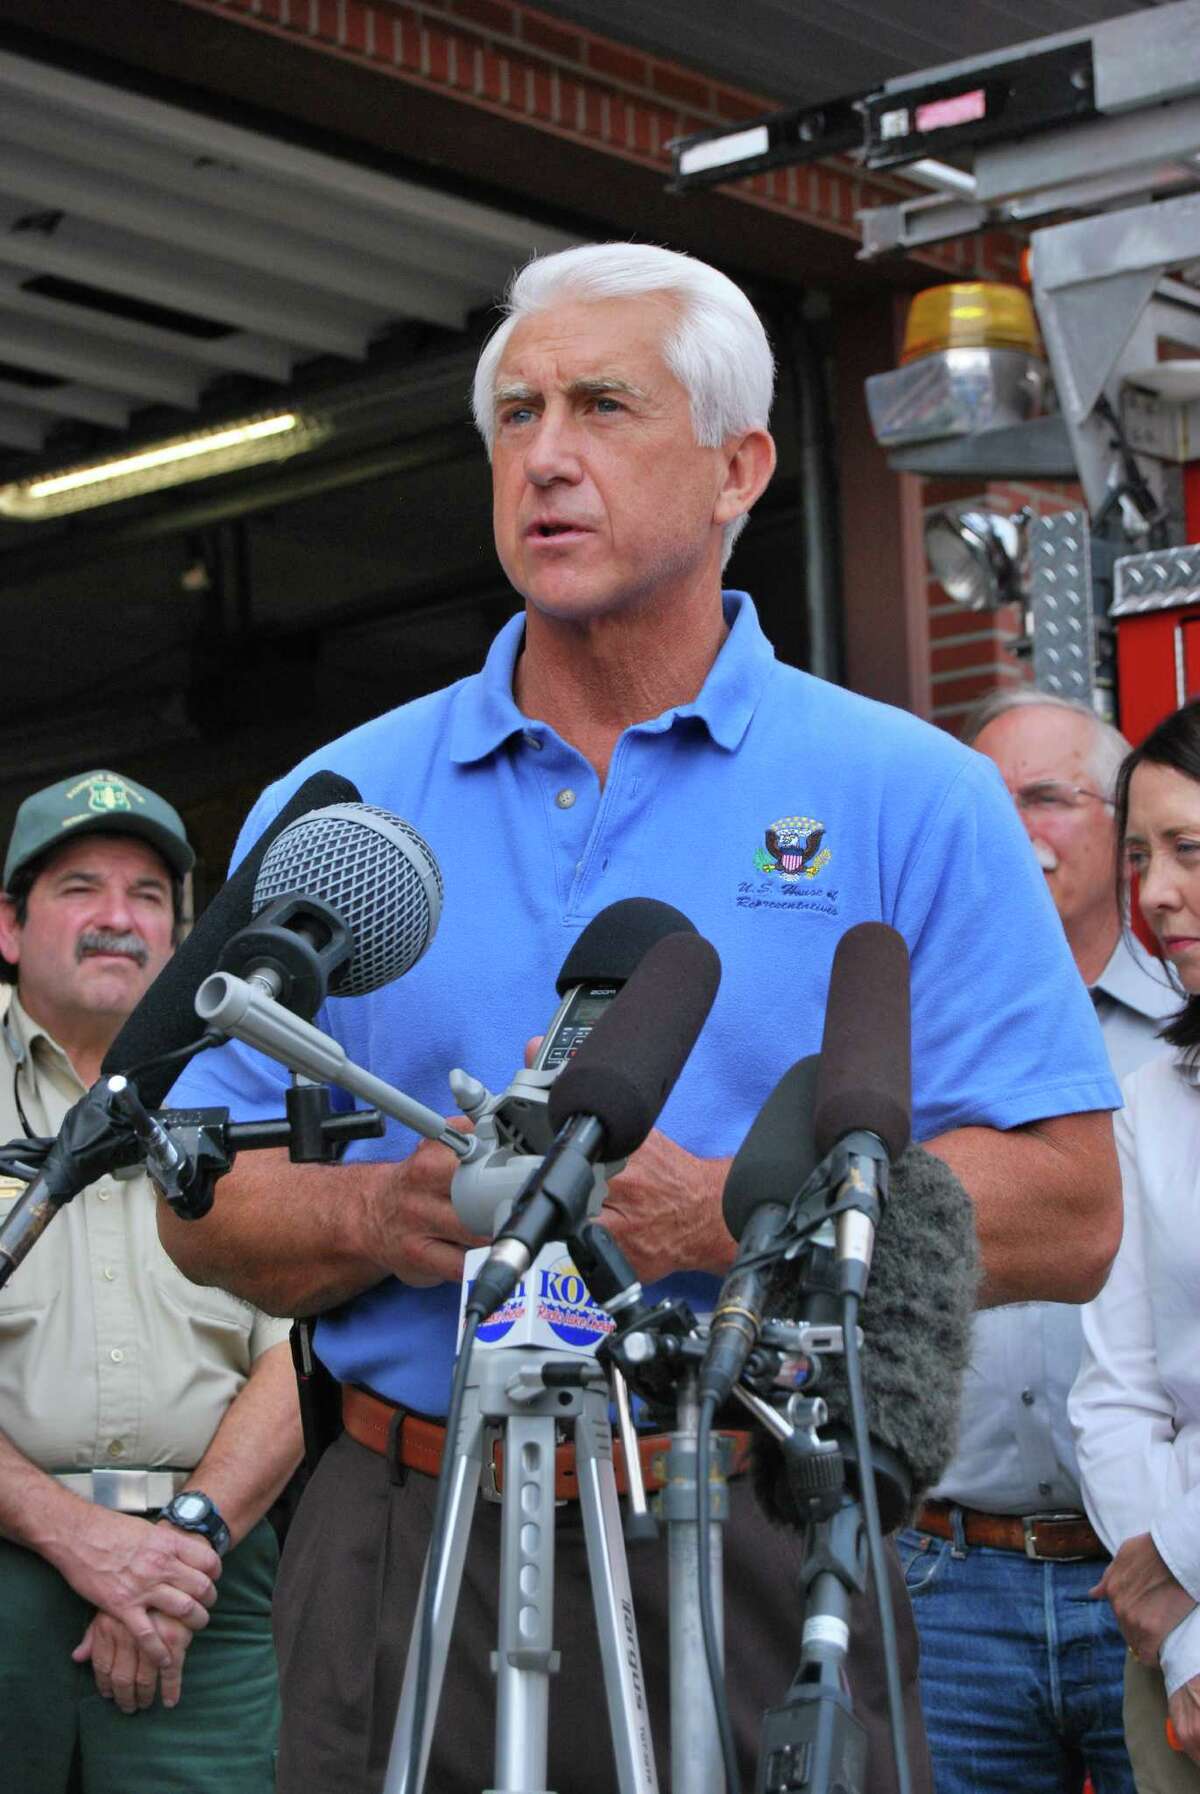 Republican Rep. Dave Reichert: "We can and should defend the children who were brought to our nation many years ago outside of their own control."